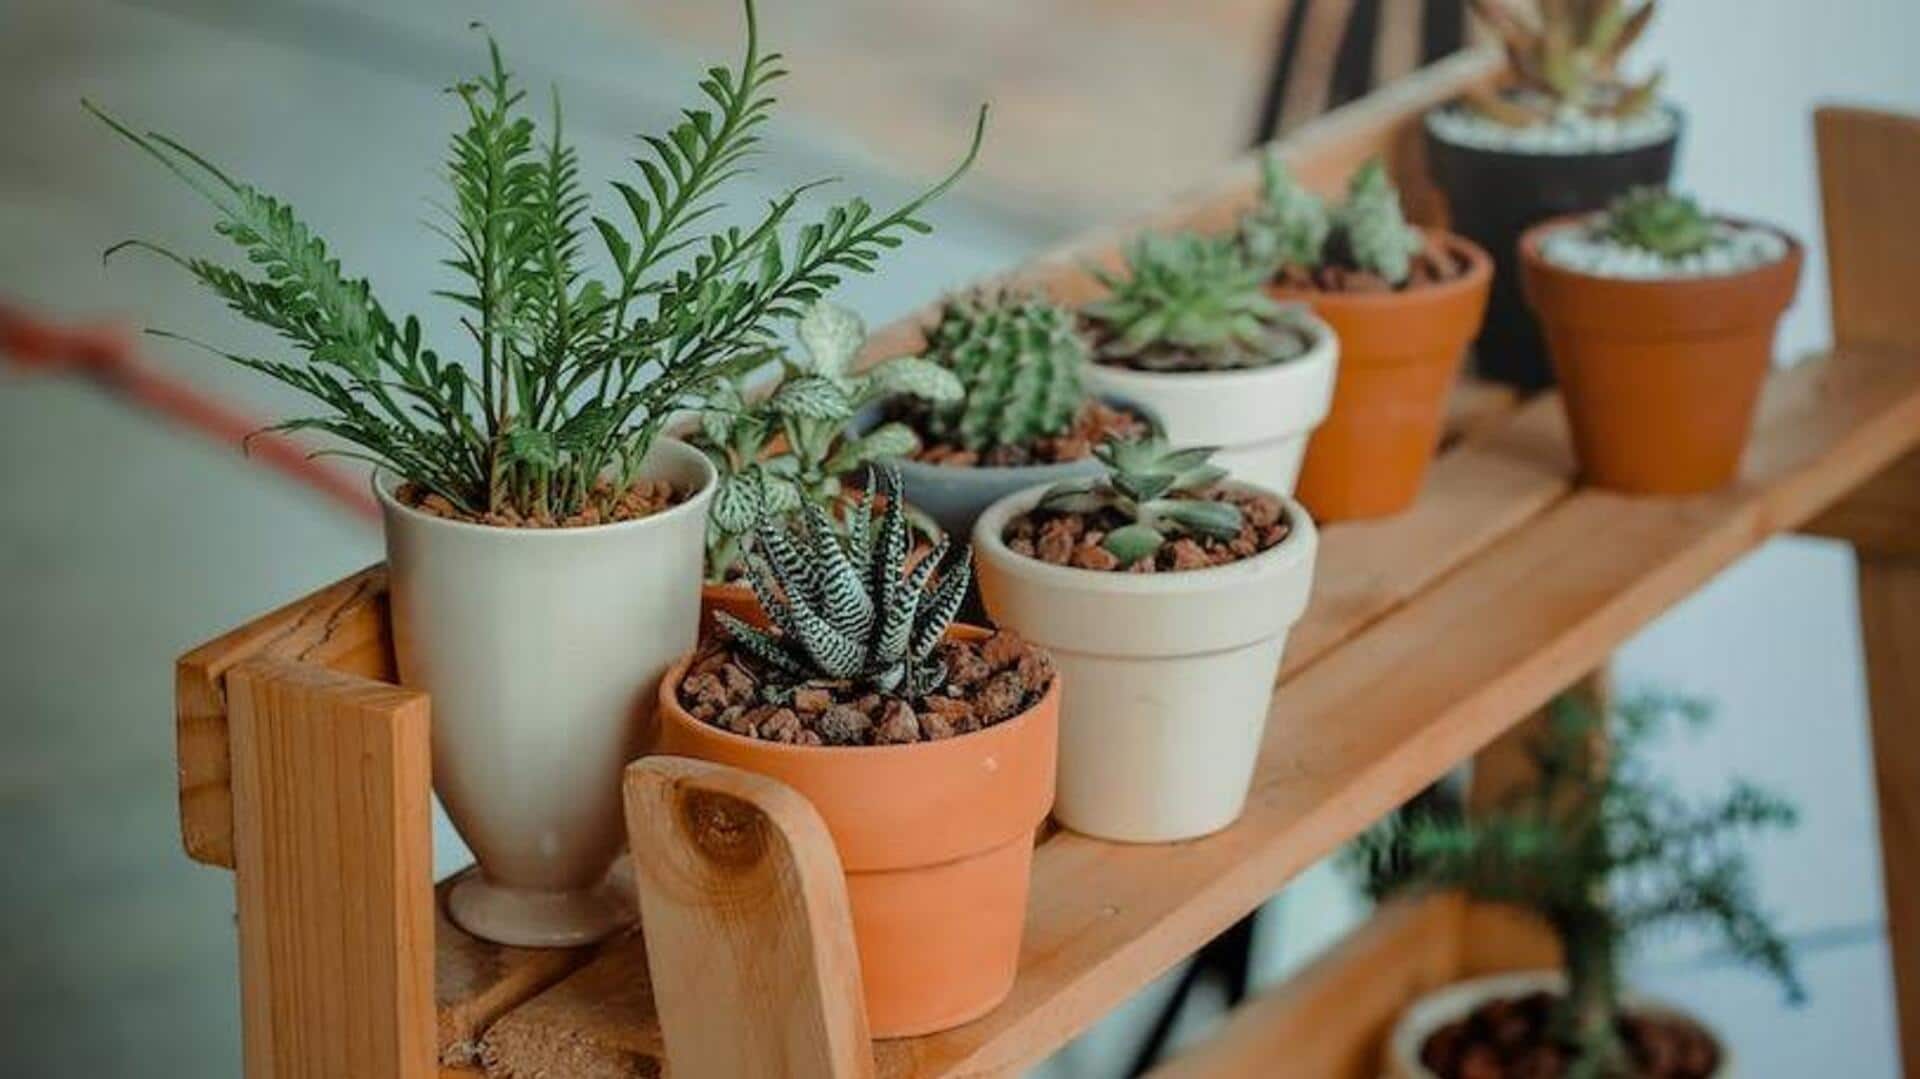 Winter care hacks for your indoor plants